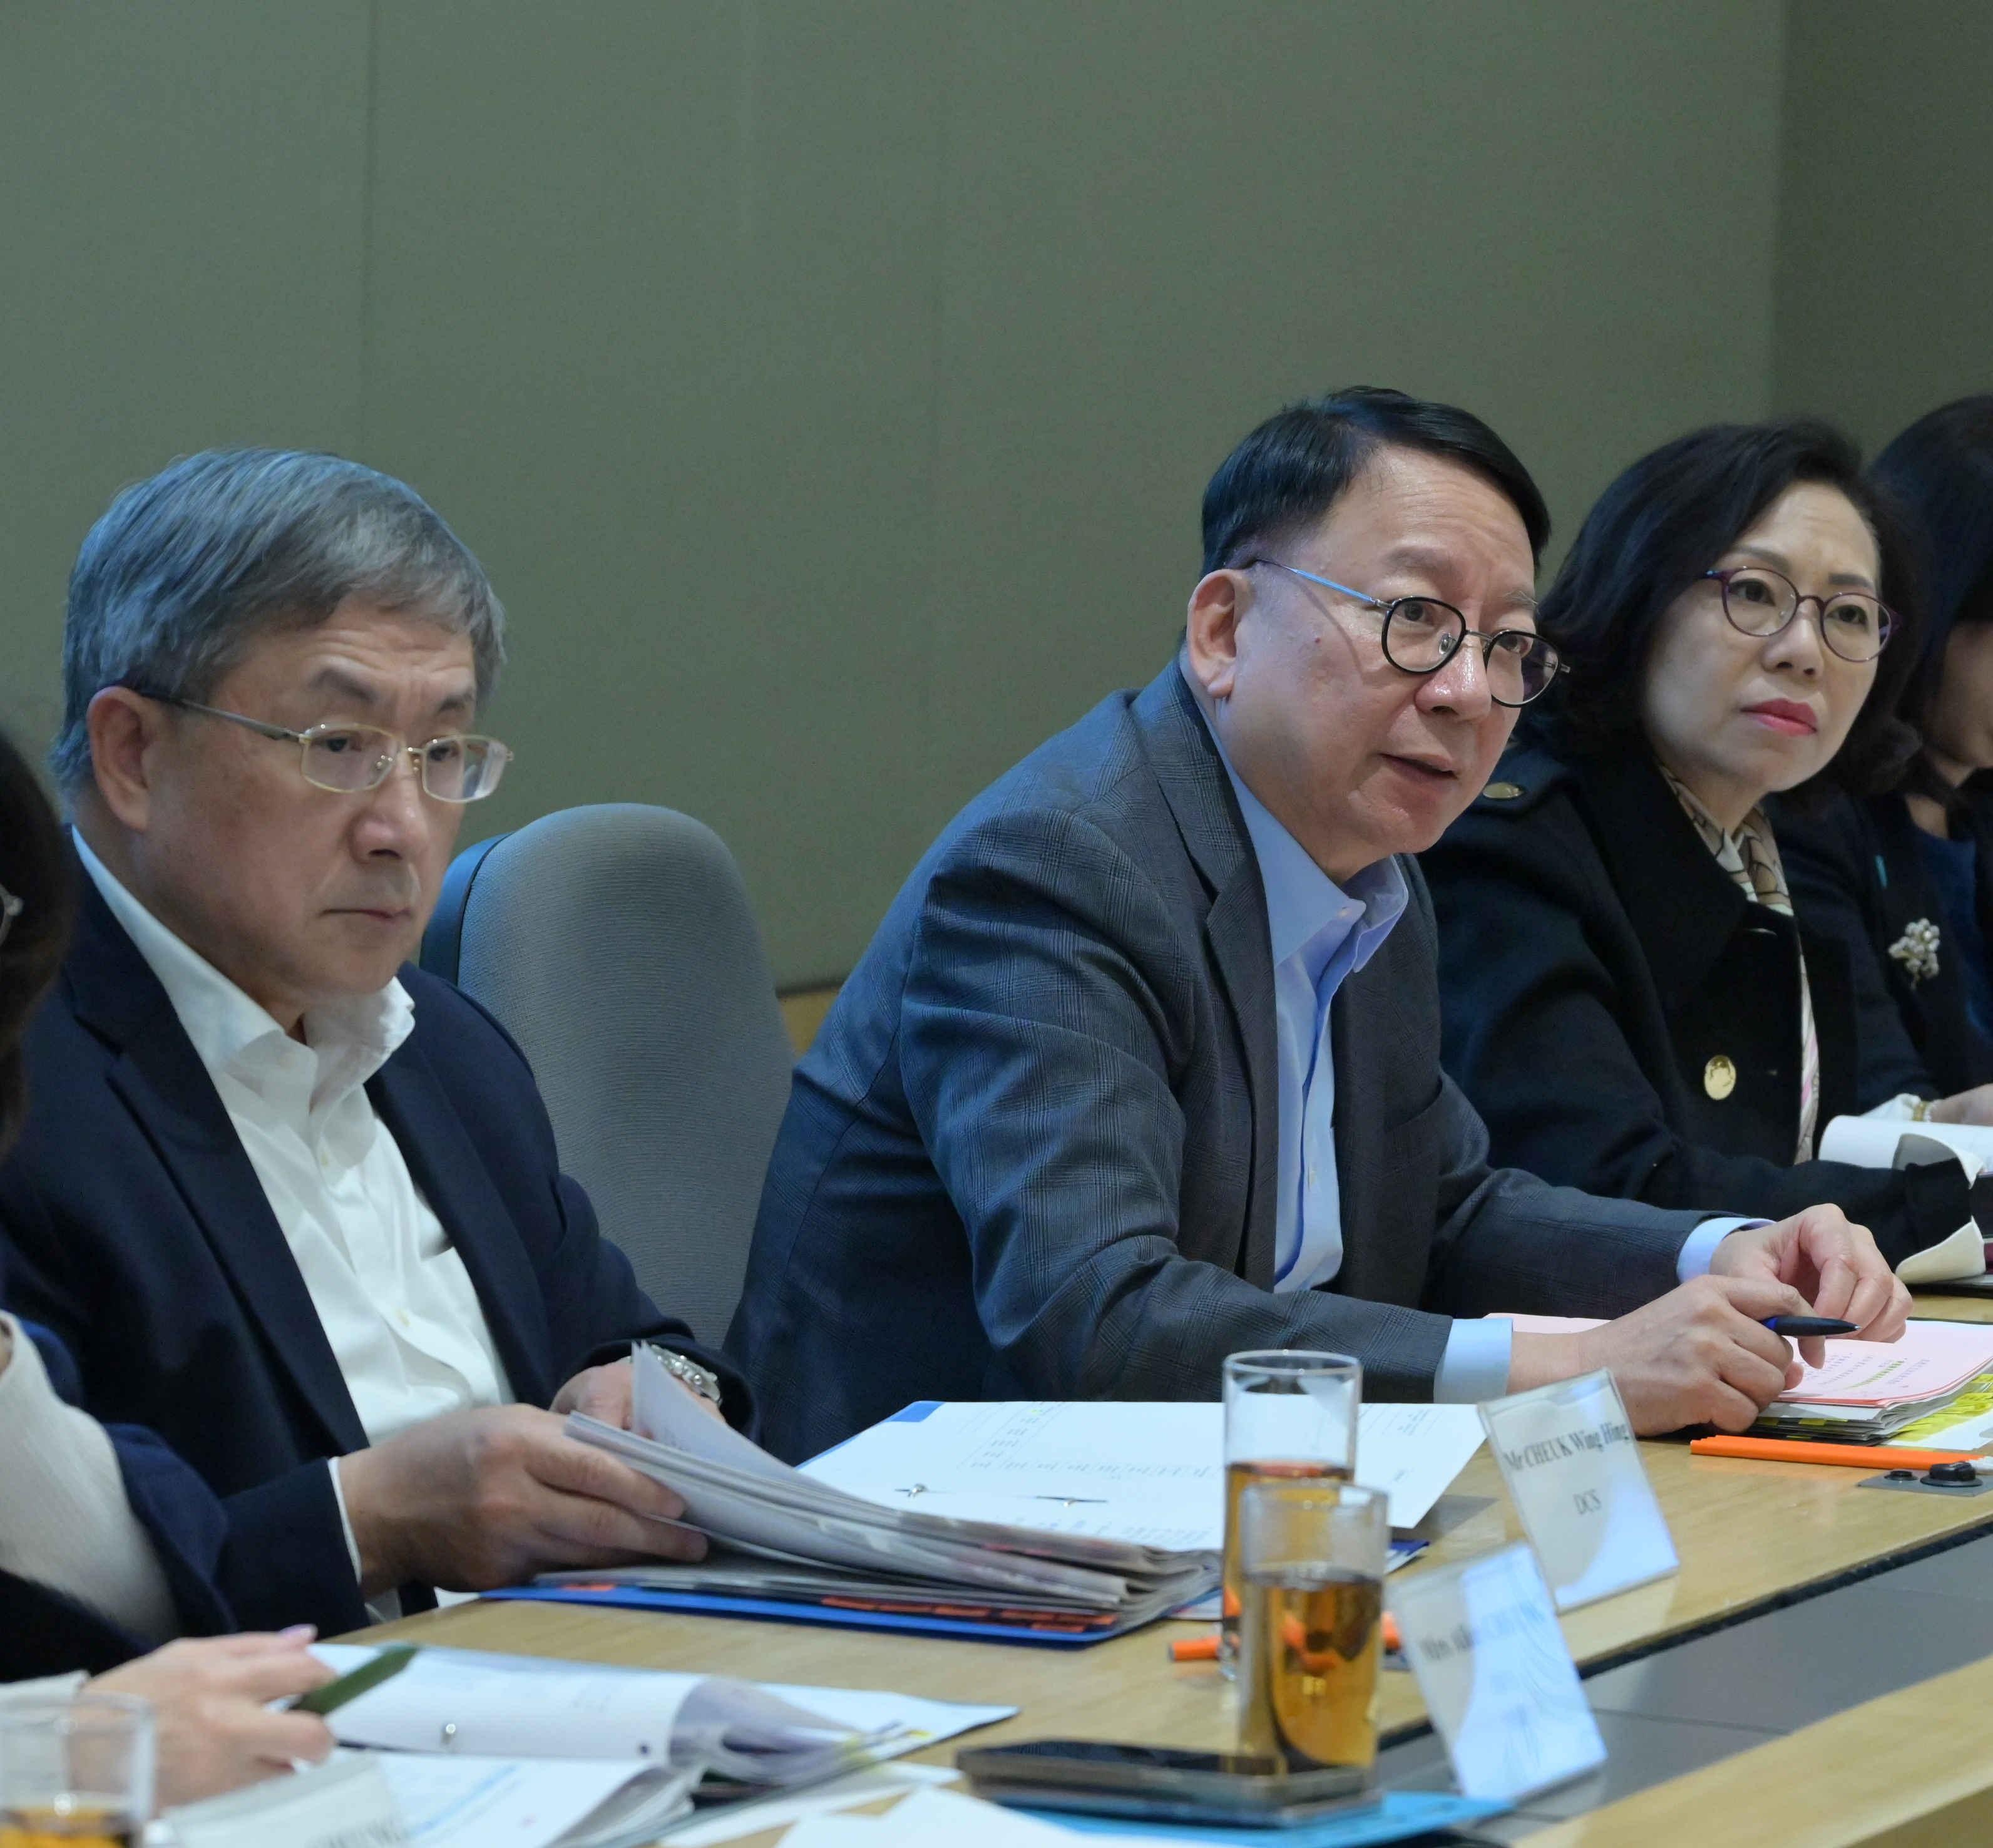 The Chief Secretary for Administration, Mr Chan Kwok-ki, chaired the second meeting of the Steering Committee on District Governance today (January 11). The Steering Committee listened to the work reports on the first meetings of the seventh-term District Councils at the 18 districts, and formulated strategies to address district issues of people's concern. Photo shows Mr Chan (centre) speaking at the meeting. Sitting next to him are the Deputy Chief Secretary for Administration, Mr Cheuk Wing-hing (left), and the Secretary for Home and Youth Affairs, Miss Alice Mak (right).